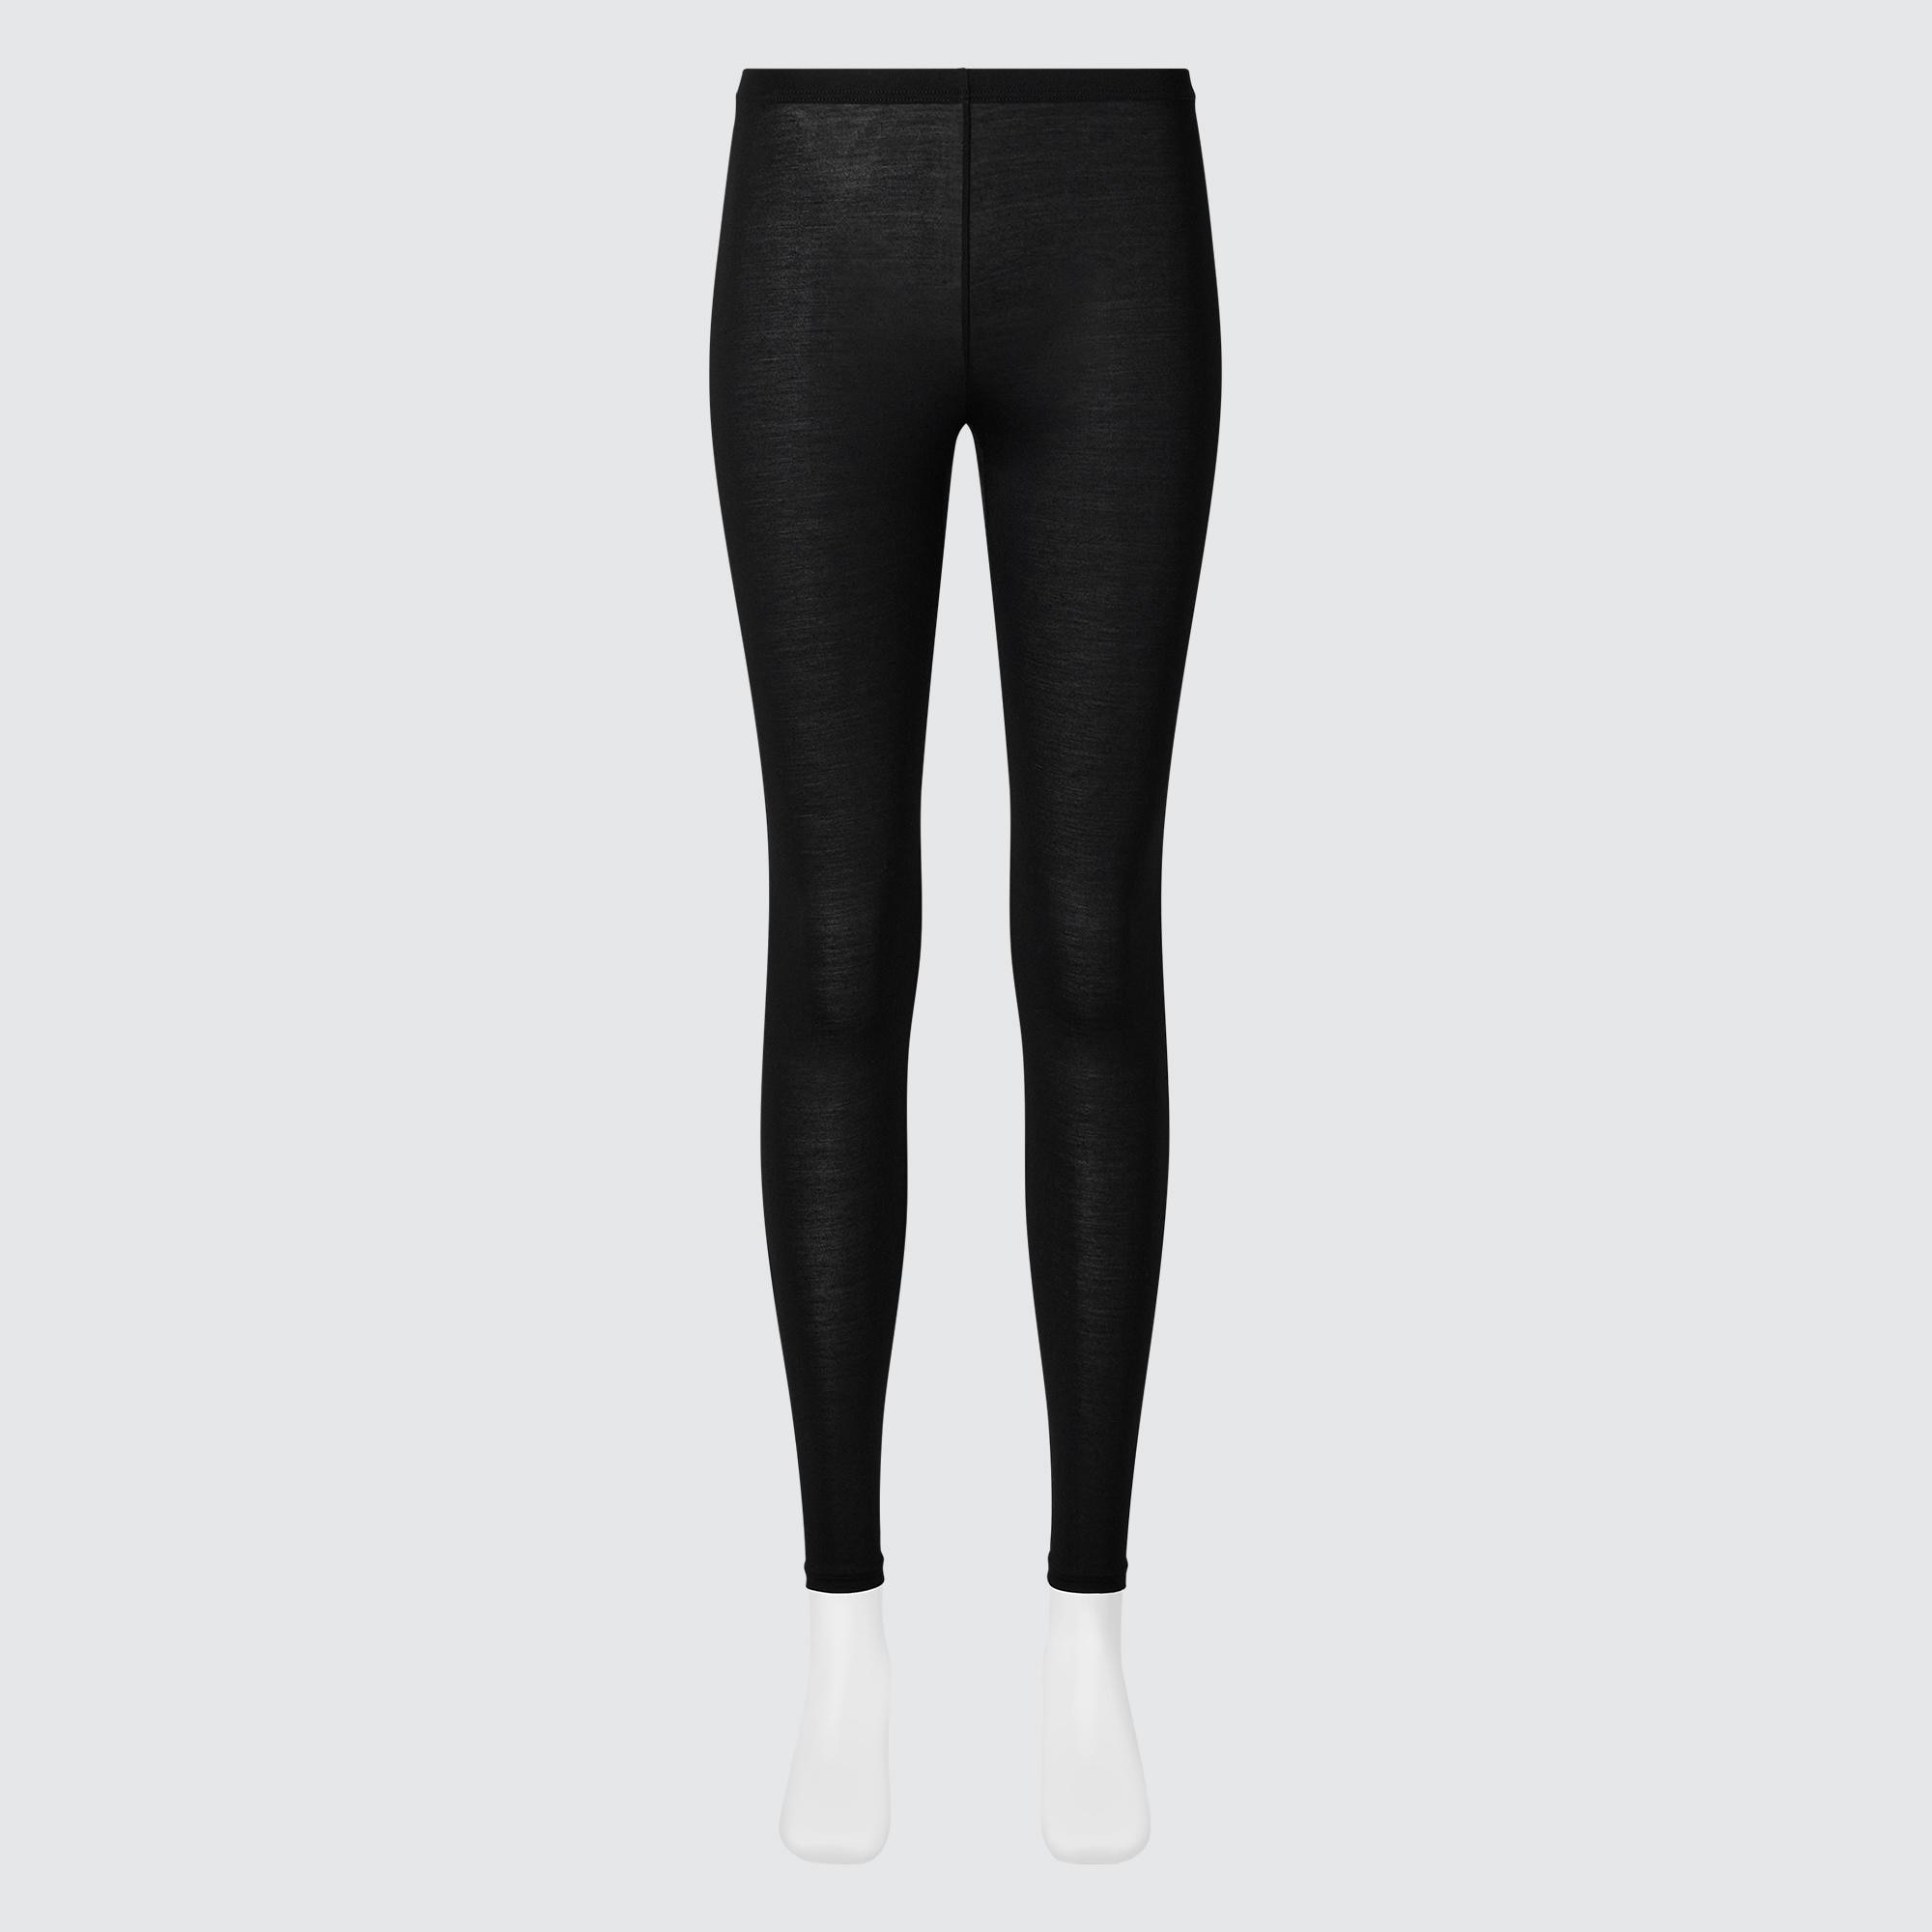 Warm Essentials by Cuddl Duds Women's Active Thermal Leggings - Black L